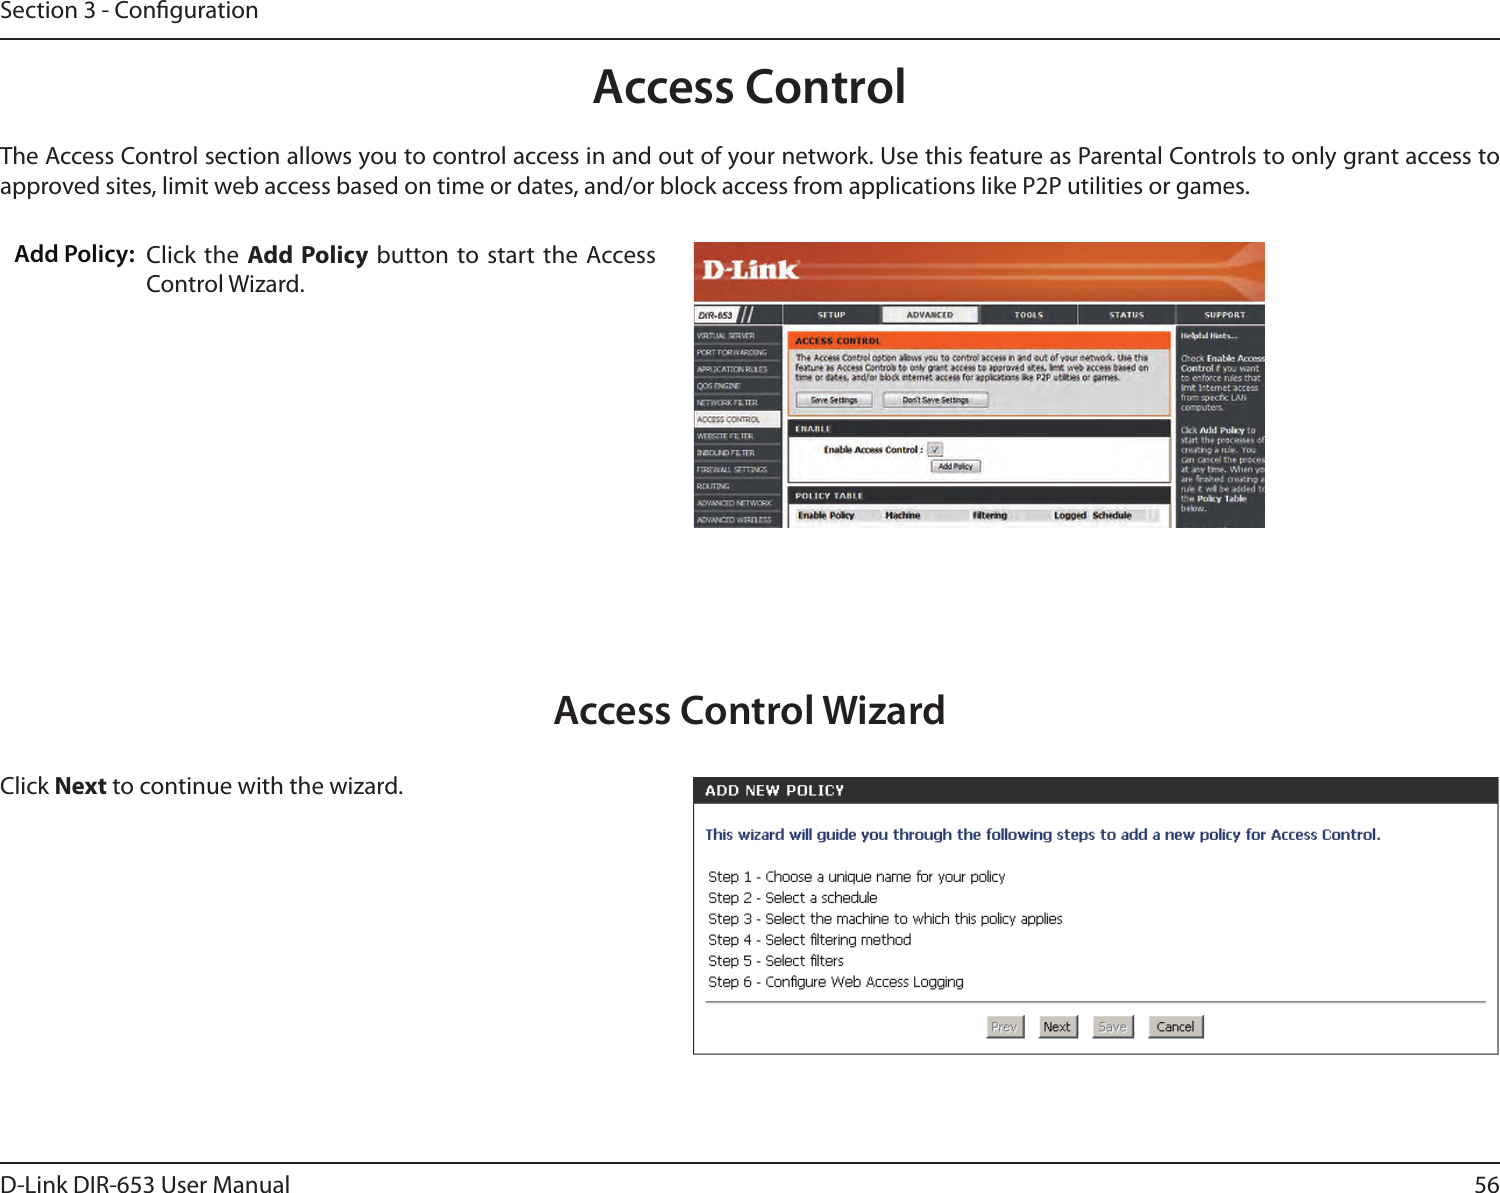 56D-Link DIR-653 User ManualSection 3 - CongurationAccess ControlClick the  Add Policy  button to  start  the Access Control Wizard. Add Policy:The Access Control section allows you to control access in and out of your network. Use this feature as Parental Controls to only grant access to approved sites, limit web access based on time or dates, and/or block access from applications like P2P utilities or games.Click Next to continue with the wizard.Access Control Wizard